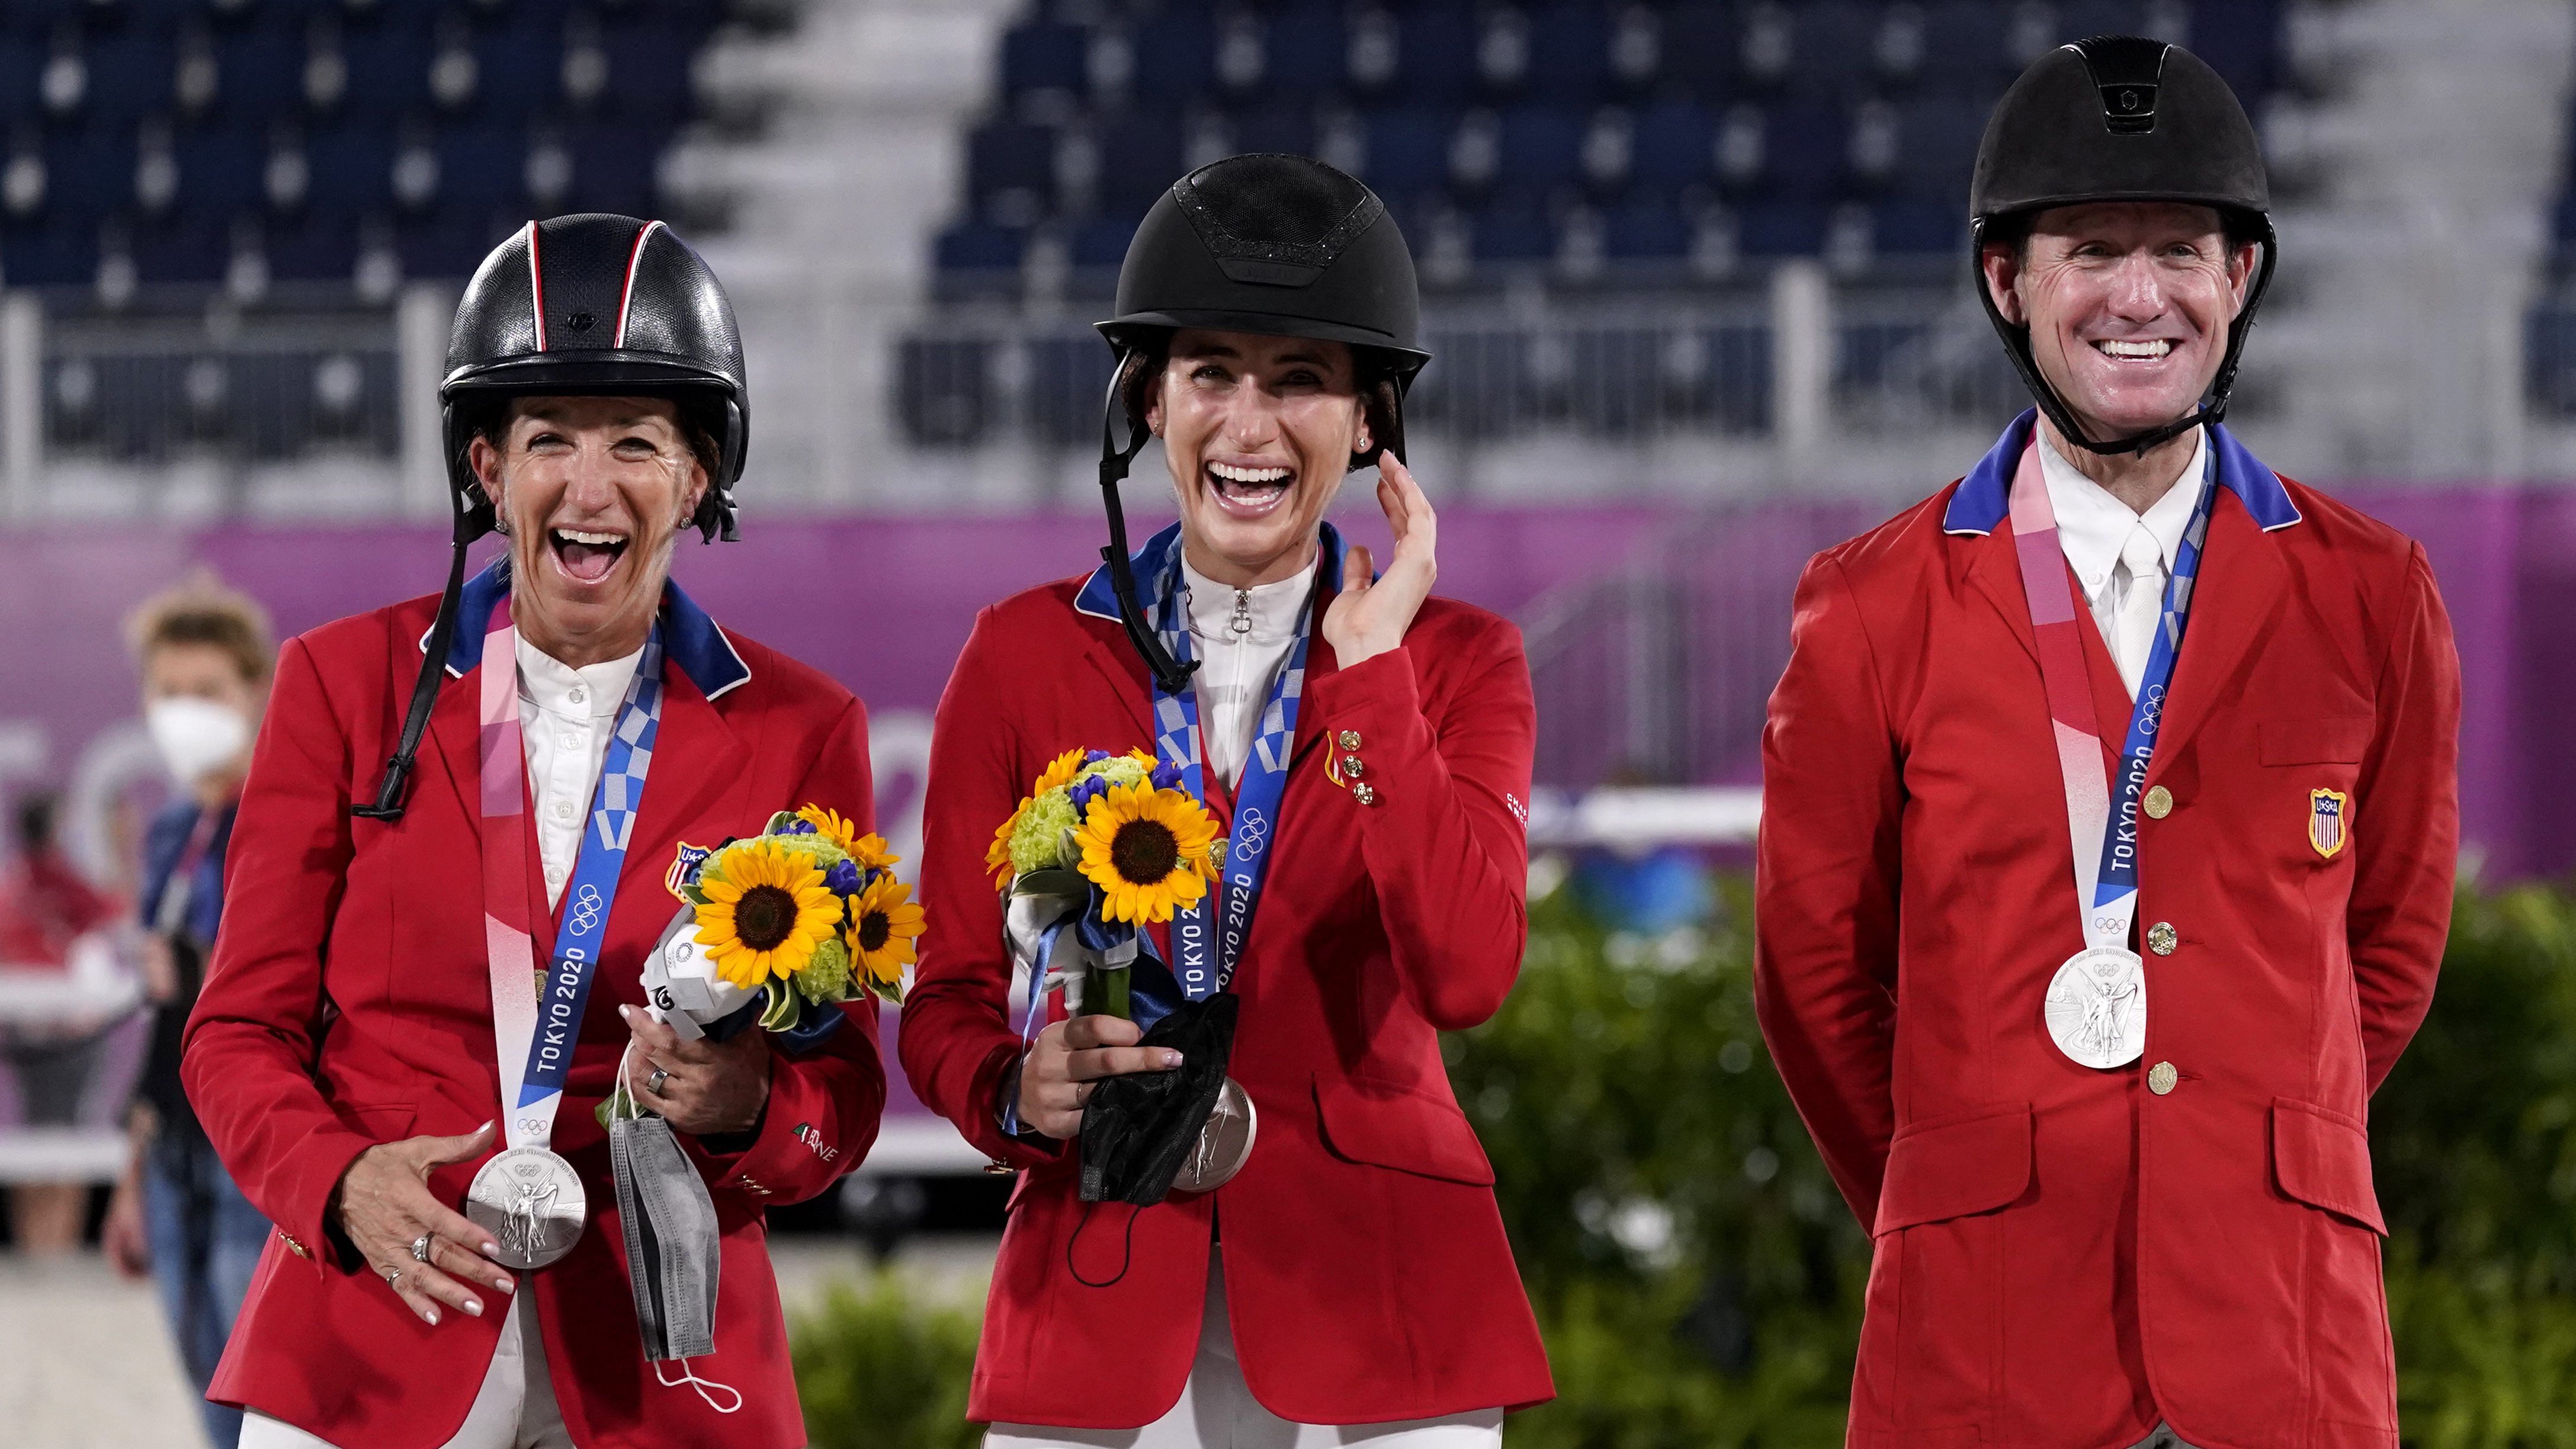 united states won silver medal for equestrian jumping in tokyo olympic